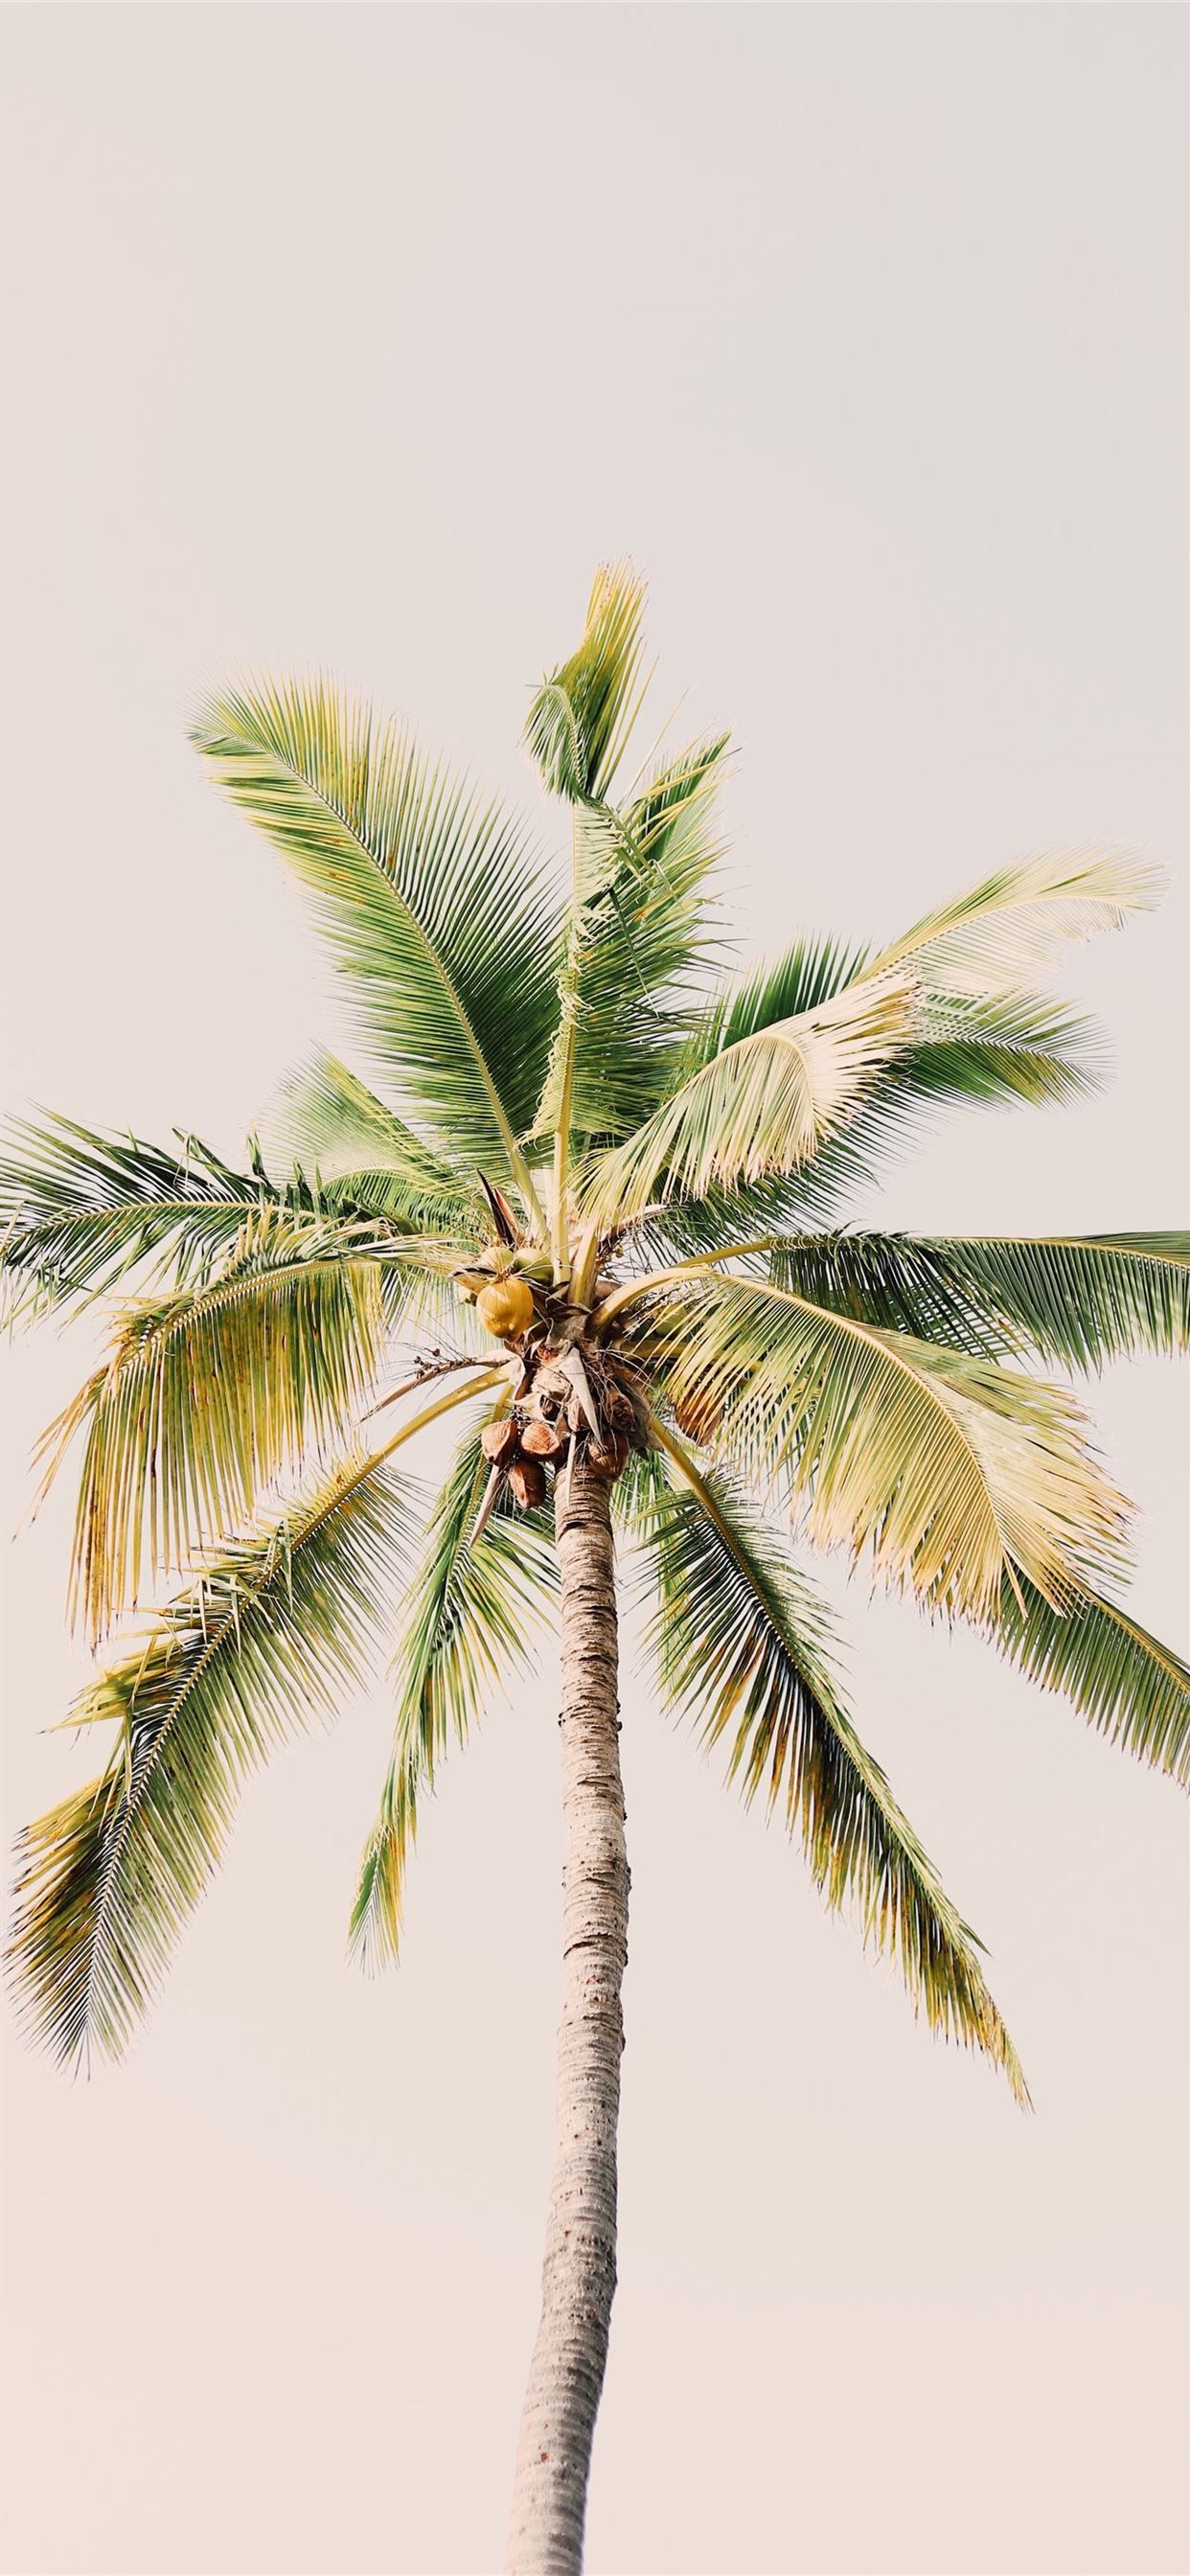 green coconut tree at daytime iPhone Wallpaper Free Download